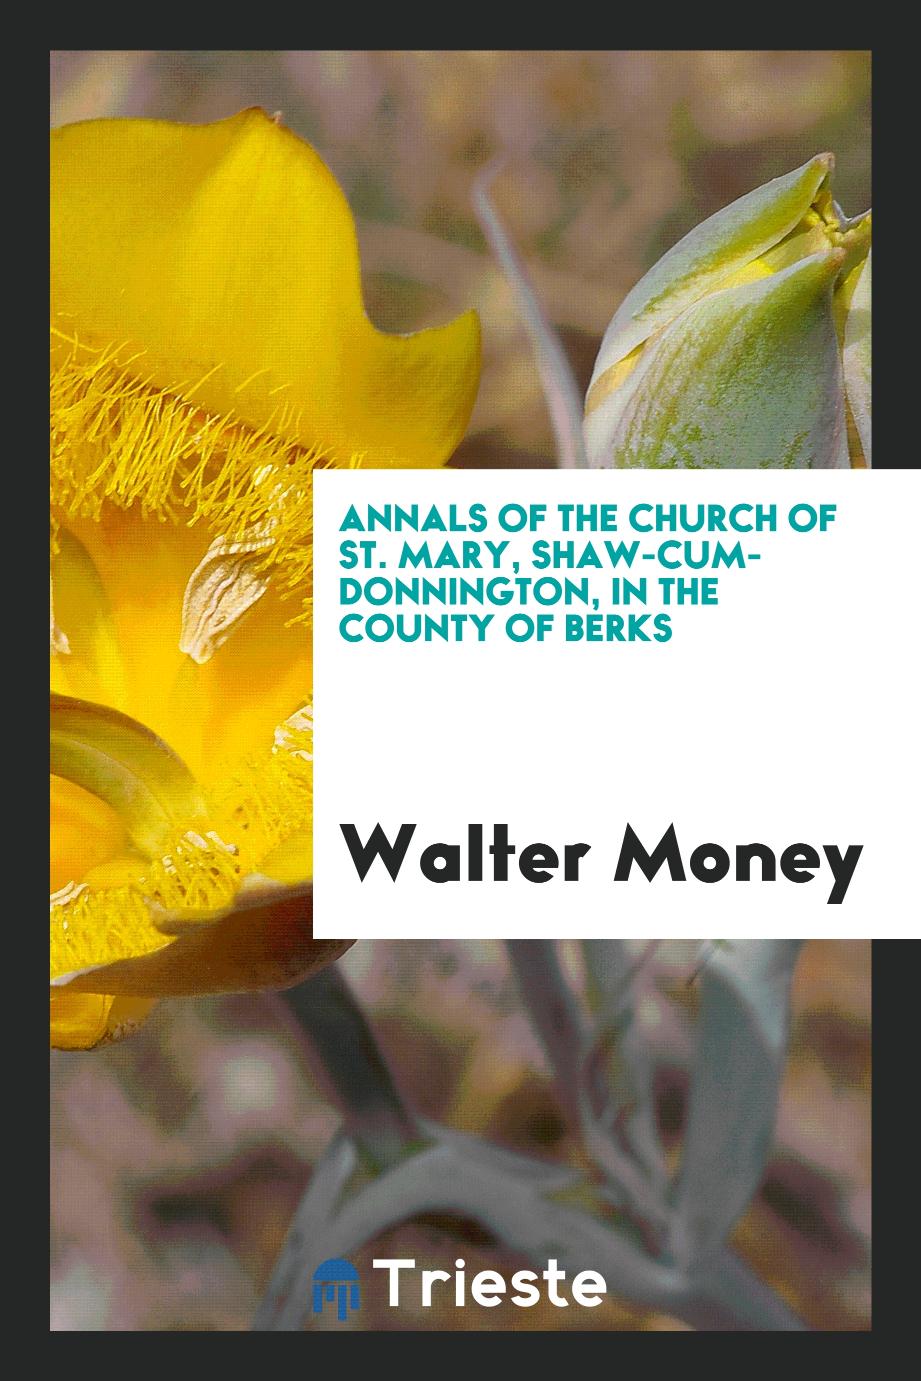 Annals of the Church of St. Mary, Shaw-cum-Donnington, in the County of Berks